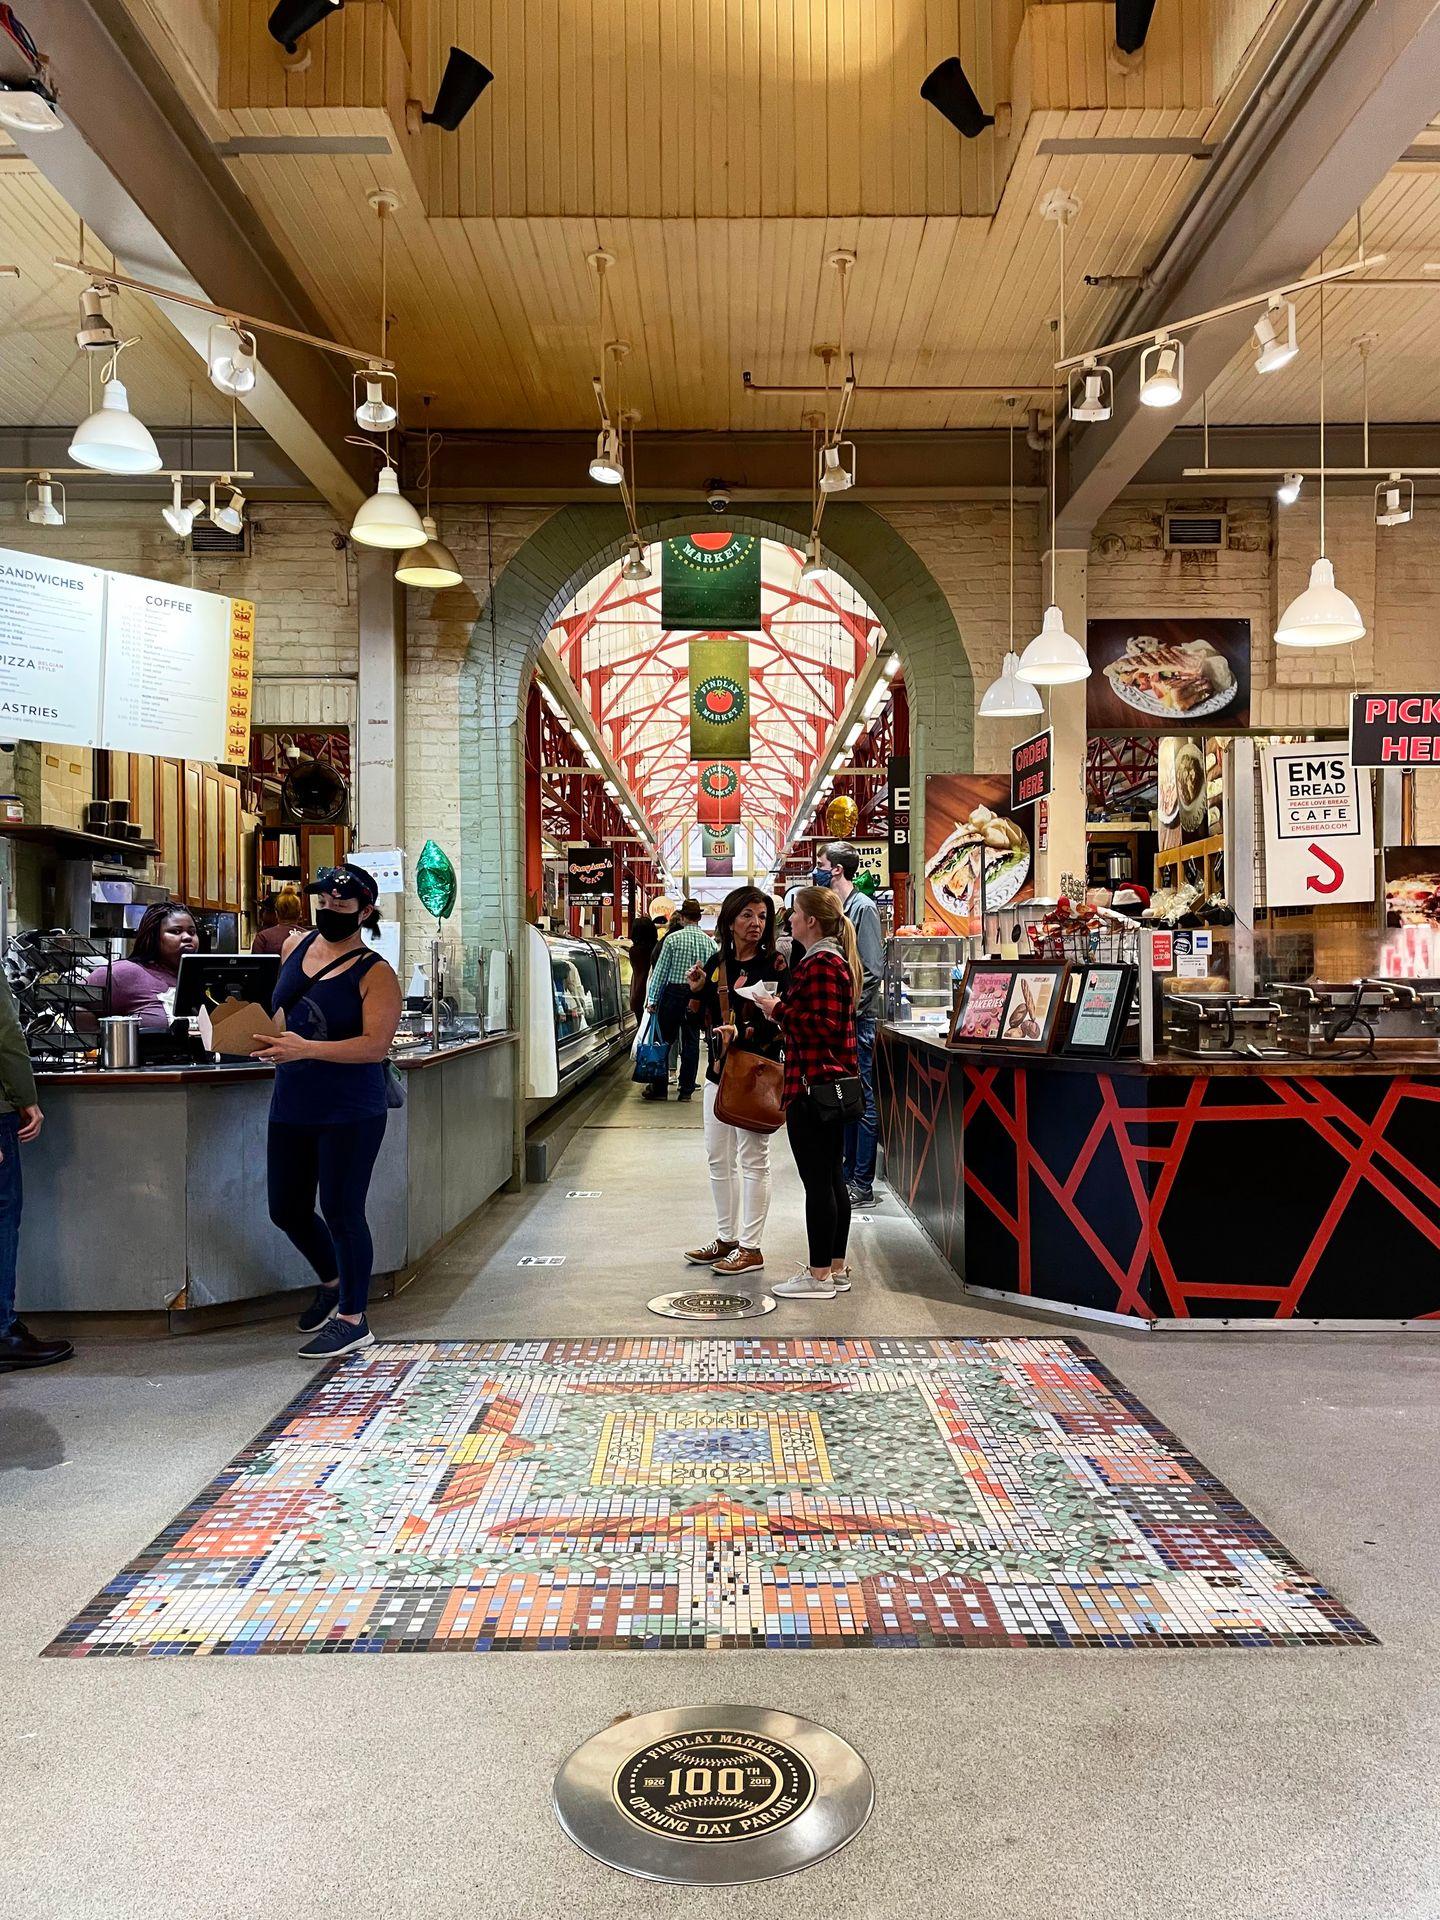 The interior of Findlay Market. There is a tile design on the floor in the center of the hall.